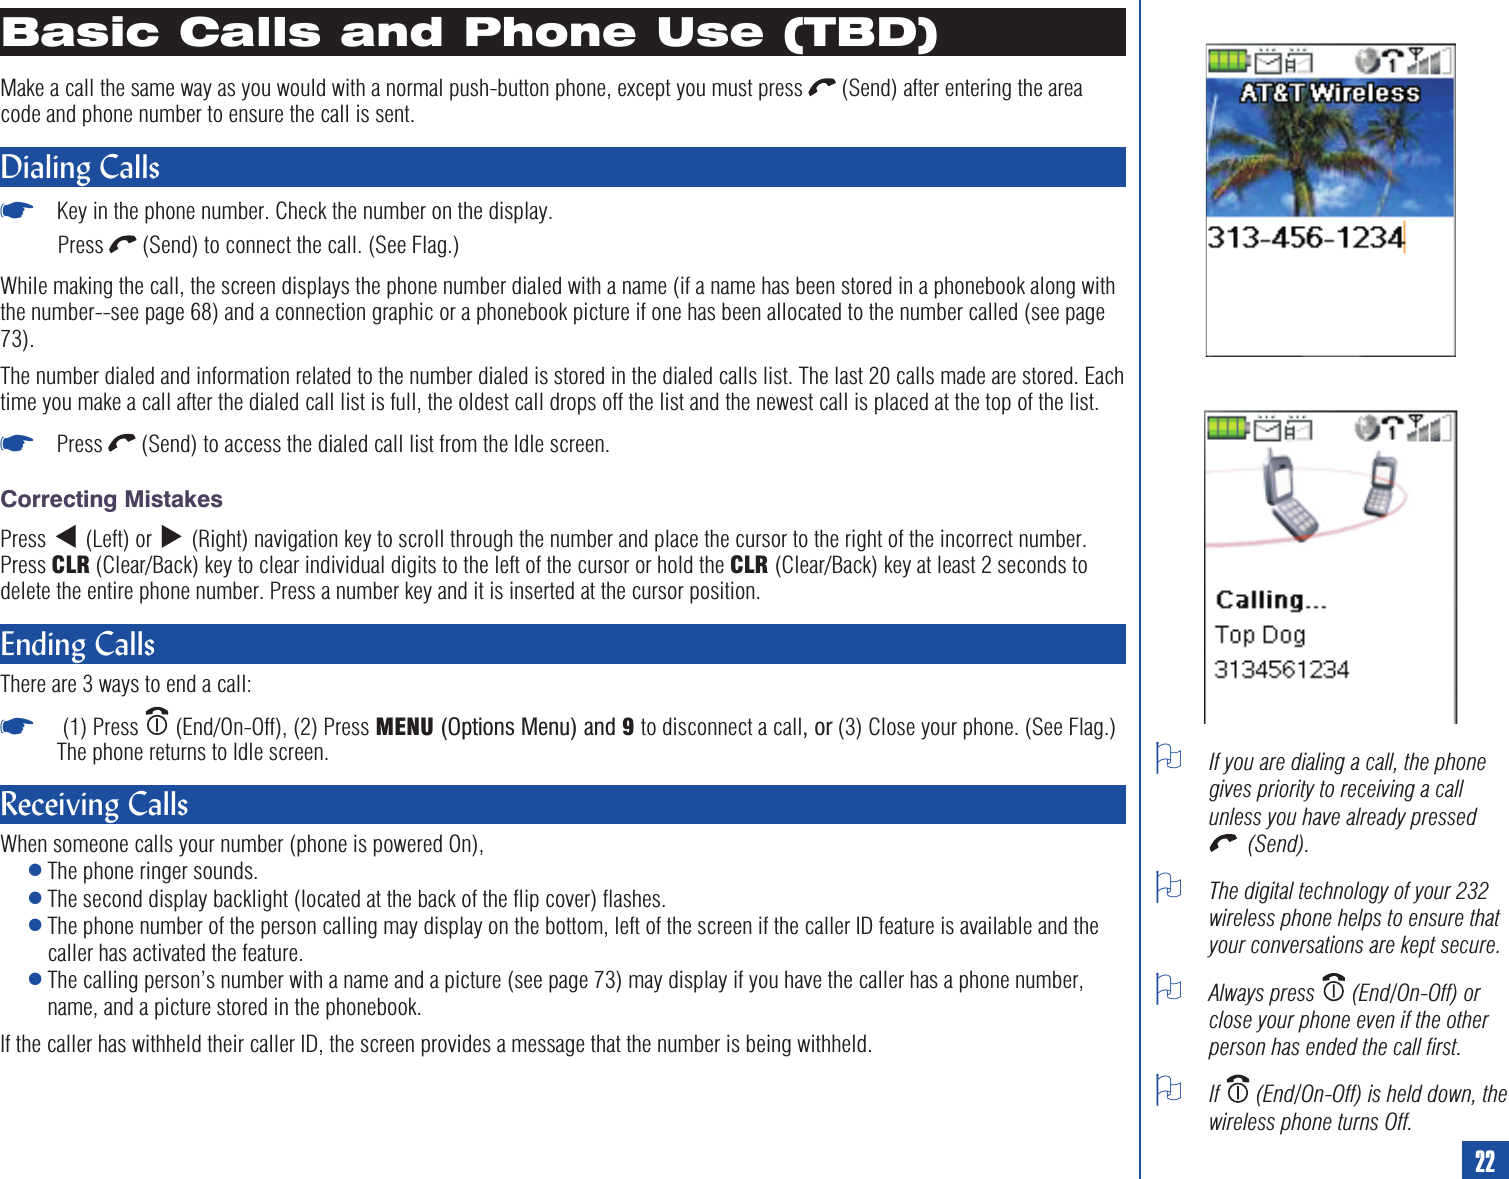 Basic Calls and Phone Use (TBD)Make a call the same way as you would with a normal push-button phone, except you must press (Send) after entering the areacode and phone number to ensure the call is sent.Dialing Calls*Key in the phone number. Check the number on the display.Press (Send) to connect the call. (See Flag.)While making the call, the screen displays the phone number dialed with a name (if a name has been stored in a phonebook along withthe number--see page 68) and a connection graphic or a phonebook picture if one has been allocated to the number called (see page73).The number dialed and information related to the number dialed is stored in the dialed calls list. The last 20 calls made are stored. Eachtime you make a call after the dialed call list is full, the oldest call drops off the list and the newest call is placed at the top of the list.*Press (Send) to access the dialed call list from the Idle screen.Correcting MistakesPress (Left) or (Right) navigation key to scroll through the number and place the cursor to the right of the incorrect number.Press CLR (Clear/Back) key to clear individual digits to the left of the cursor or hold the CLR (Clear/Back) key at least 2 seconds todelete the entire phone number. Press a number key and it is inserted at the cursor position.Ending CallsThere are 3 ways to end a call:*(1) Press (End/On-Off), (2) Press MENU (Options Menu) and 9to disconnect a call,or(3) Close your phone. (See Flag.)The phone returns to Idle screen.Receiving CallsWhen someone calls your number (phone is powered On),lThe phone ringer sounds.lThe second display backlight (located at the back of the flip cover) flashes.lThe phone number of the person calling may display on the bottom, left of the screen if the caller ID feature is available and thecaller has activated the feature.lThe calling person’s number with a name and a picture (see page 73) may display if you have the caller has a phone number,name, and a picture stored in the phonebook.If the caller has withheld their caller ID, the screen provides a message that the number is being withheld.OIf you are dialing a call, the phonegives priority to receiving a callunless you have already pressed(Send).OThe digital technology of your 232wireless phone helps to ensure thatyour conversations are kept secure.OAlways press (End/On-Off) orclose your phone even if the otherperson has ended the call first.OIf (End/On-Off) is held down, thewireless phone turns Off.22